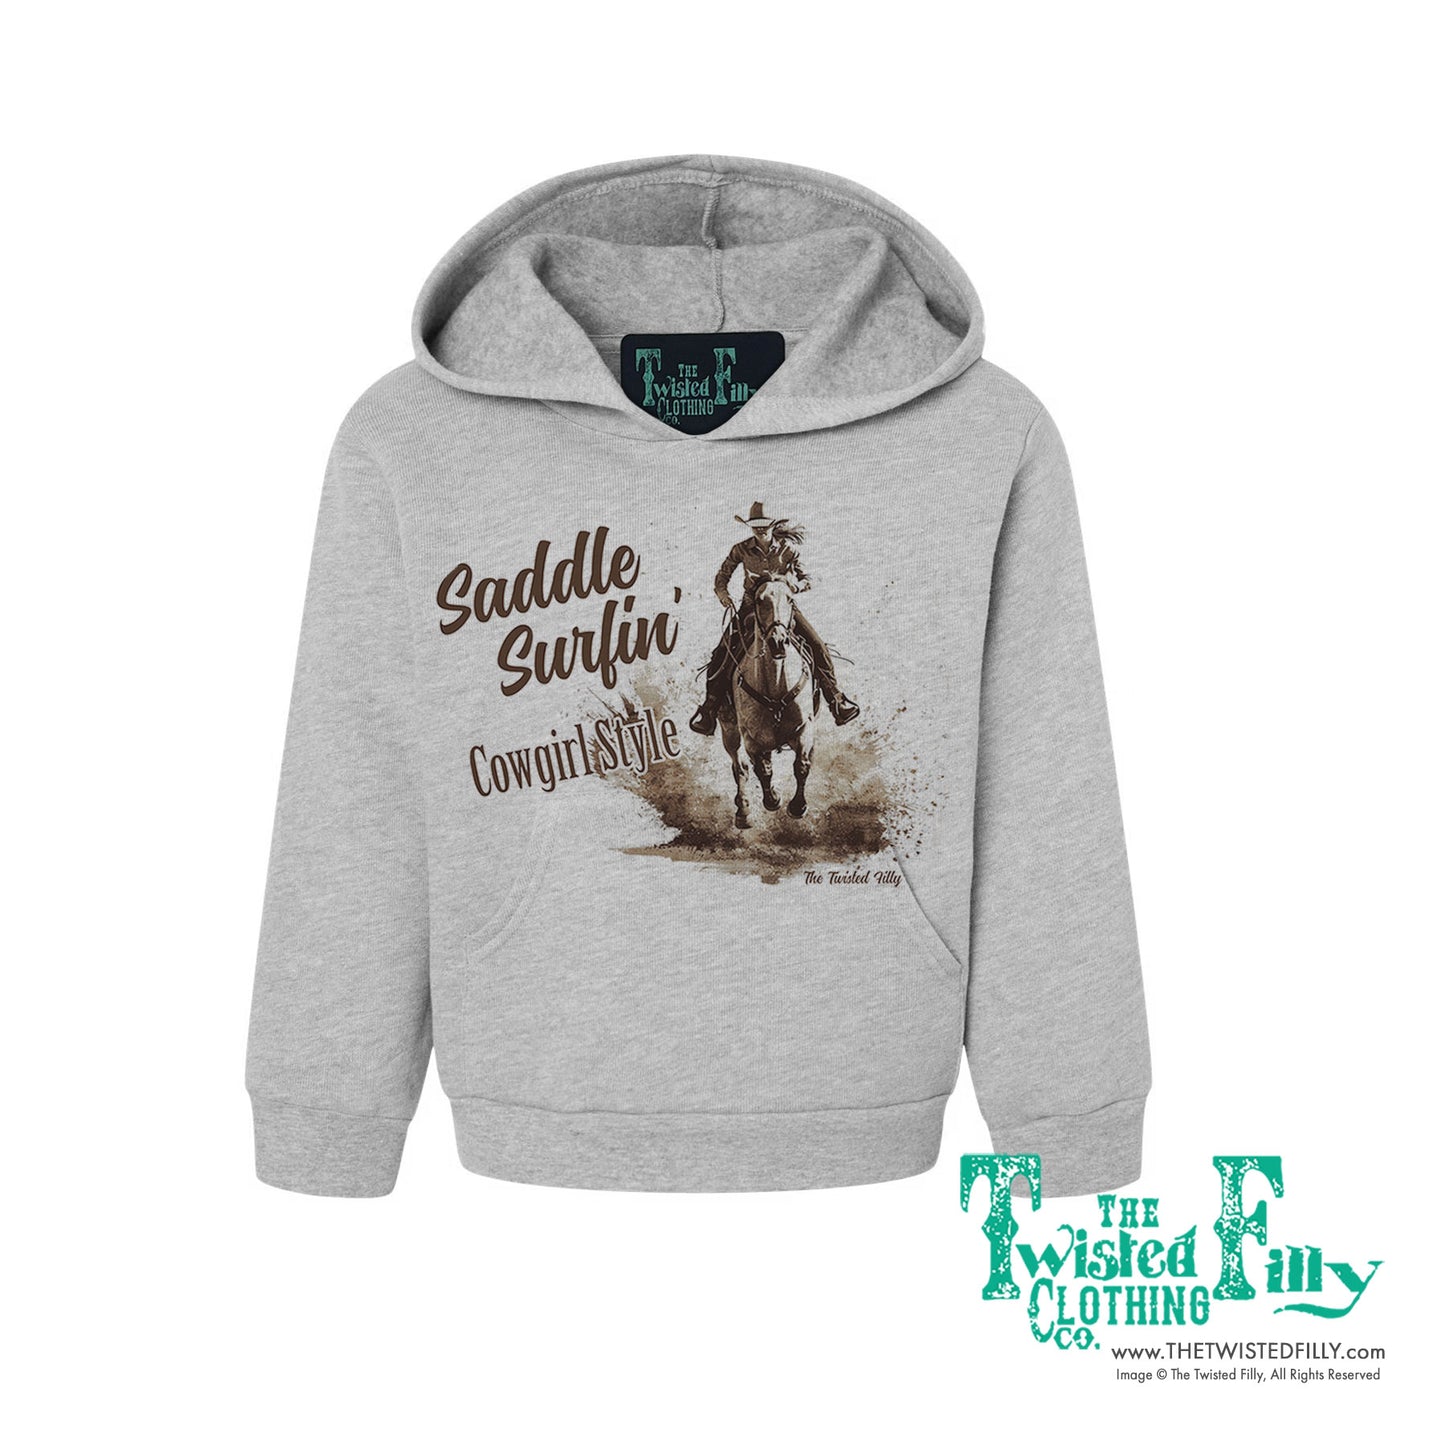 Saddle Surfin' Cowgirl Style - Toddler Girls Hoodie - Assorted Colors